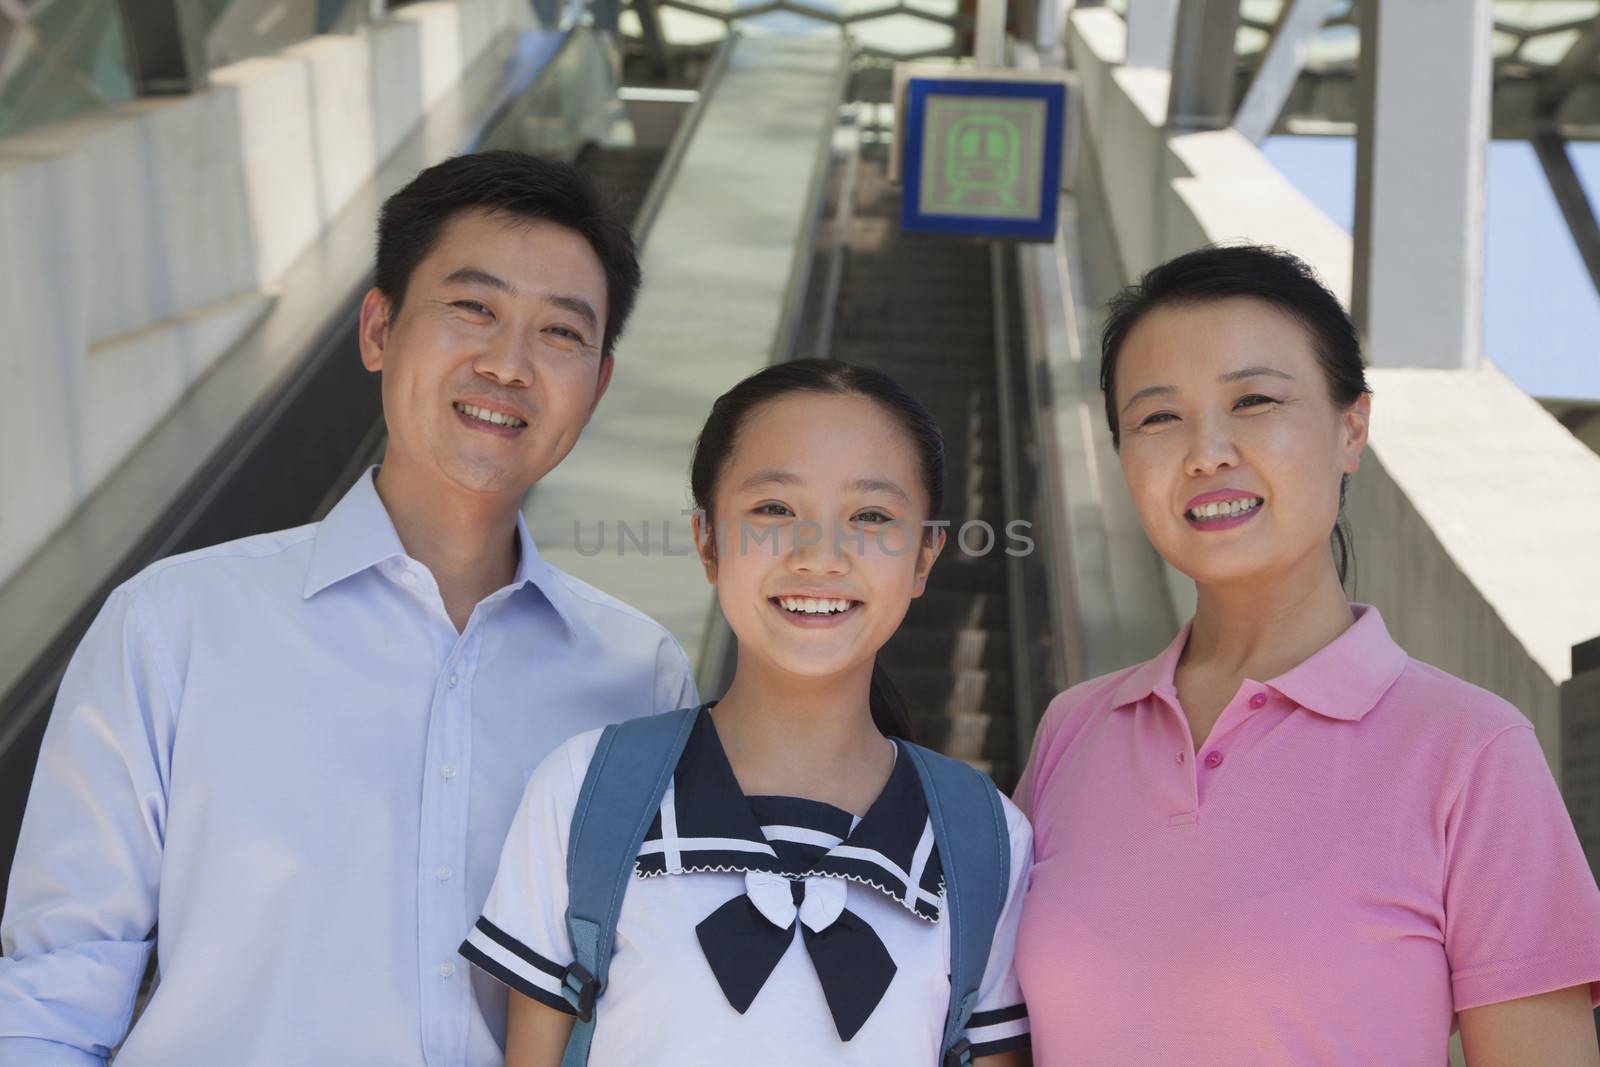 Family standing next to the escalator near the subway station